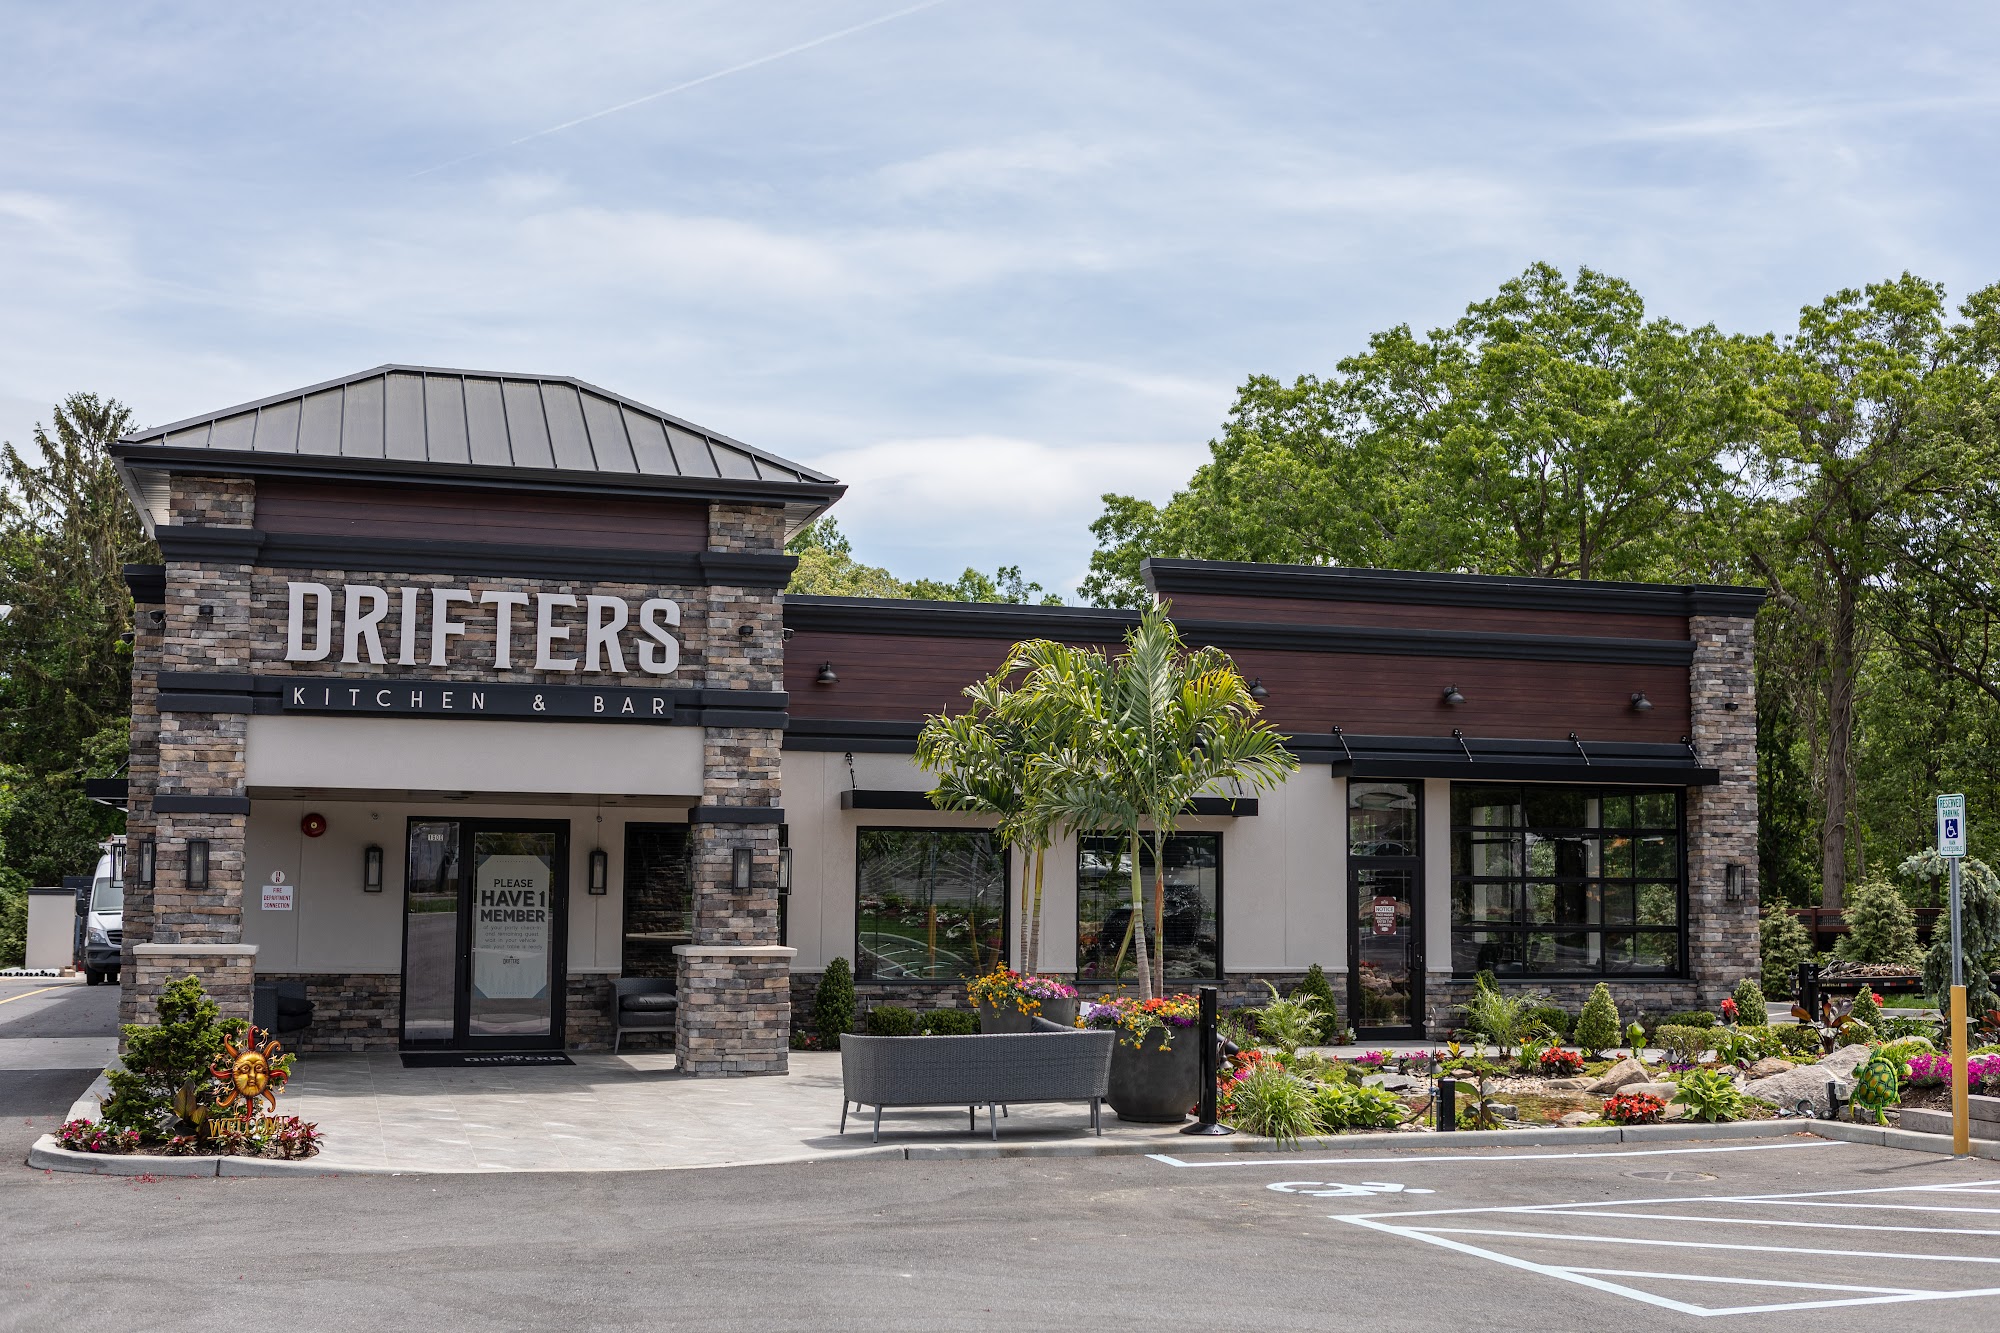 Drifters Kitchen and Bar